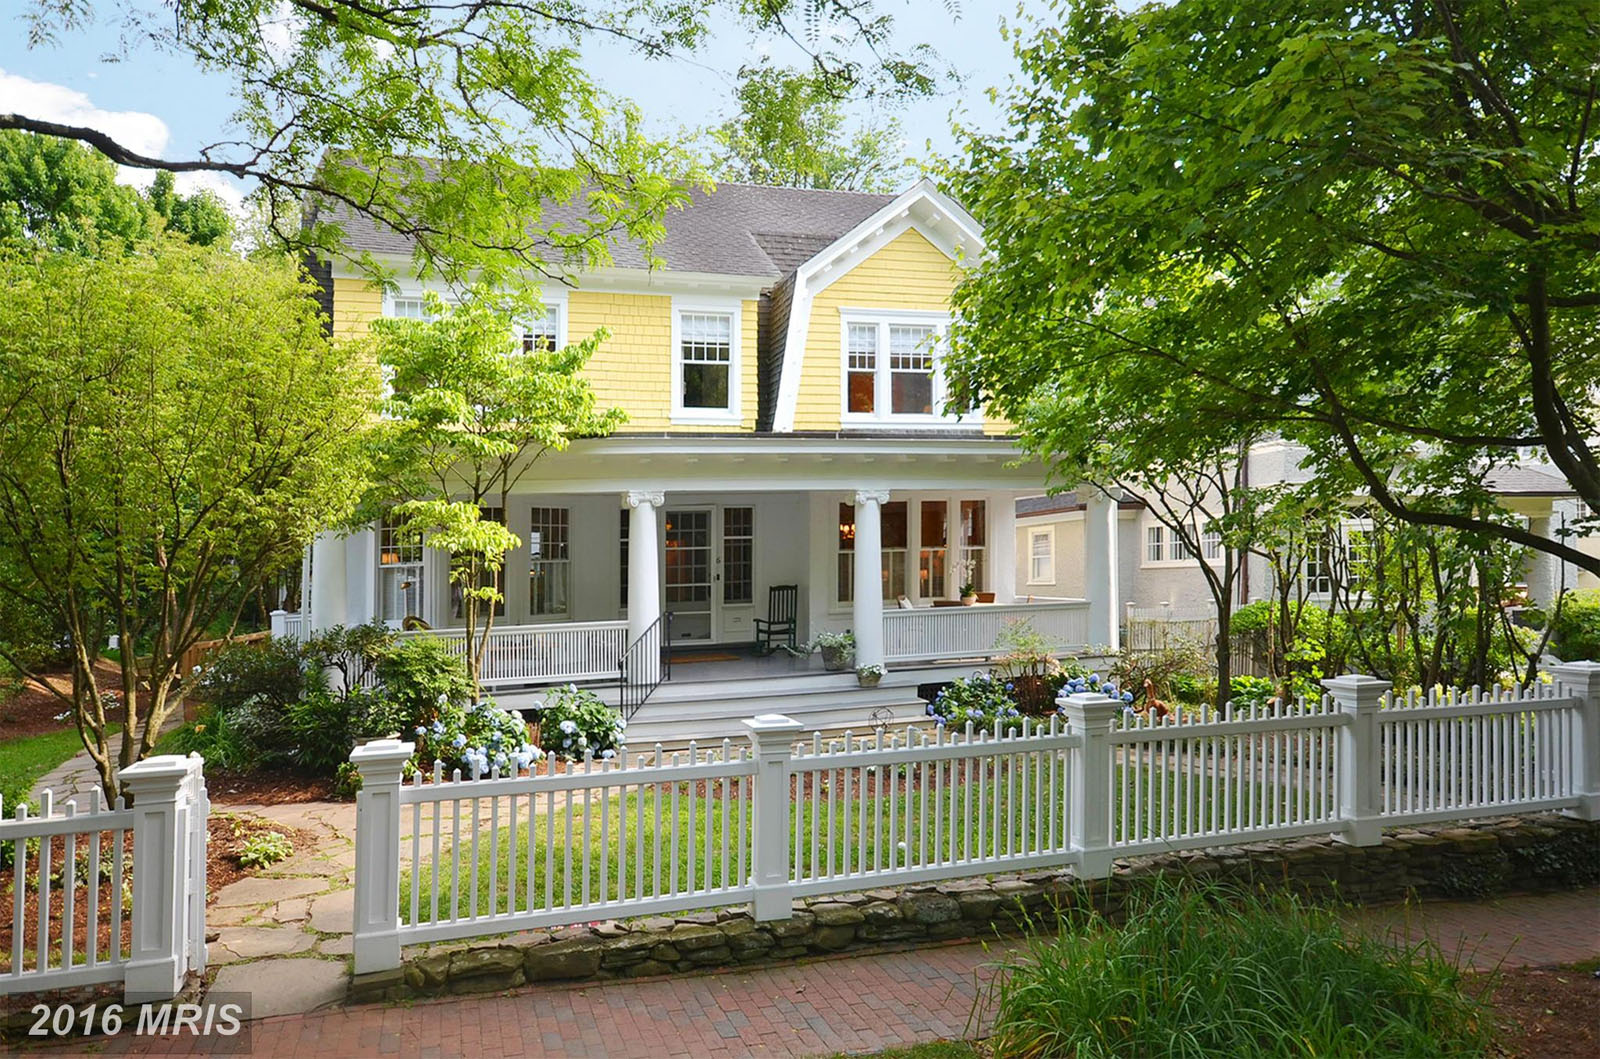 13. $2,370,000
This Chevy Chase Colonial built in 1908 has five bedrooms, four full bathrooms and two half baths. (MRIS)